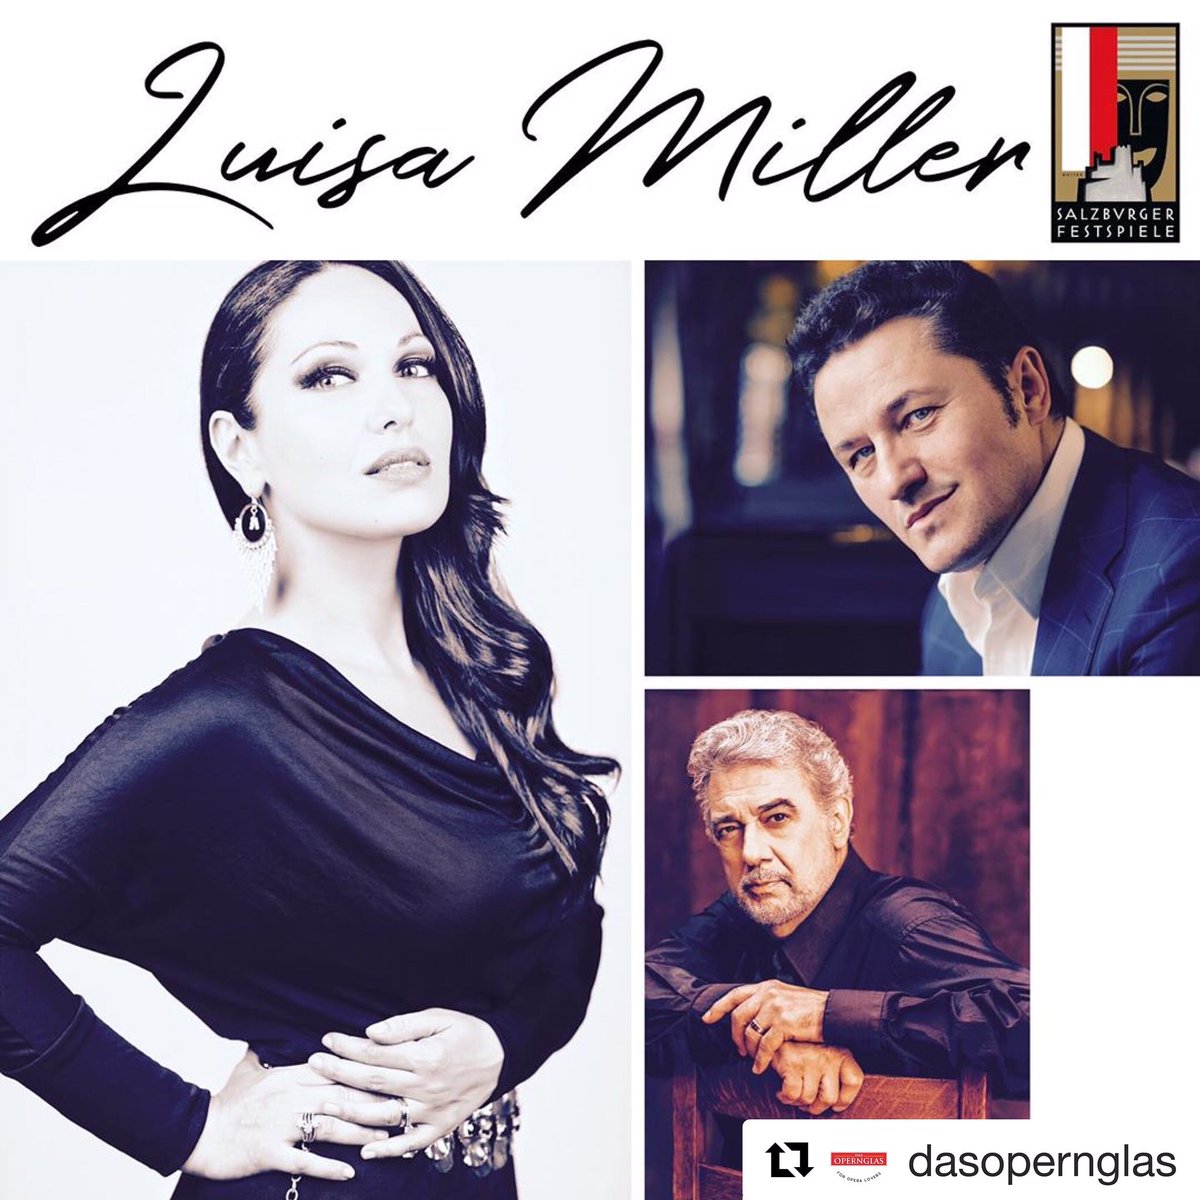 Today we have the opening of our #LuisaMiller at #SalzburgFestival and i’m soo looking forward 💖 See you all there💖 @placido_domingo @piotrbeczala @salzburgerfestspiele #NinoMachaidze #SalzburgFestspiele #Salzburg #Verdi #PlacidoDomingo #JamesConlon #PiotrBeczala @JamesJConlon